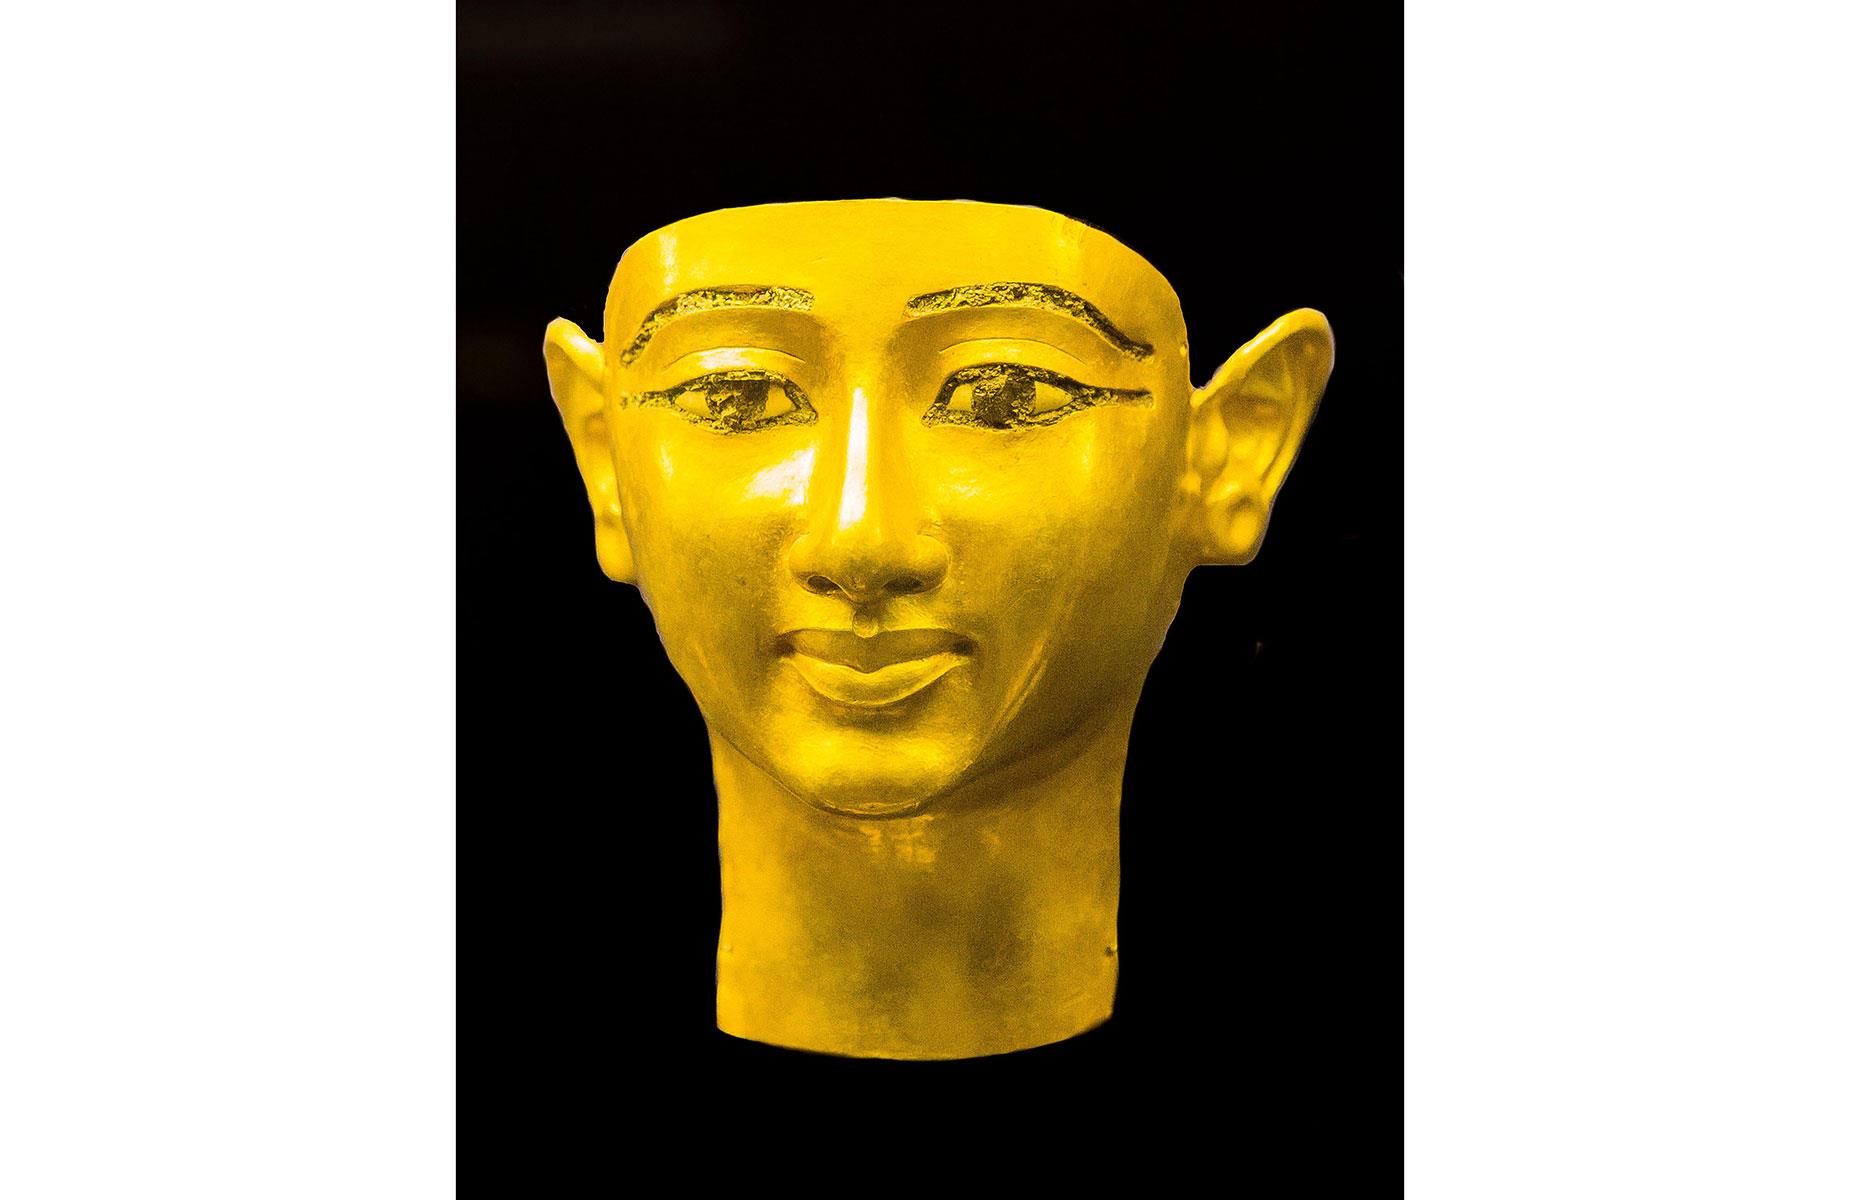 <p>Wendjebauendjed was an army general, high dignitary and high priest during King Psusennes I's reign (circa 1044-994 BC). While Wendjebauendjed wasn't of royal descent, his tomb was uncovered inside the royal necropolis, suggesting that he was a figure of great importance. His funerary mask is detailed with a slight smile and the inlaid eyes are made of glass, but you'll spot that the <a href="https://egypt-museum.com/mummy-mask-of-wendjebauendjed/">ears aren't symmetrical</a>; the left protrudes further than the right.</p>